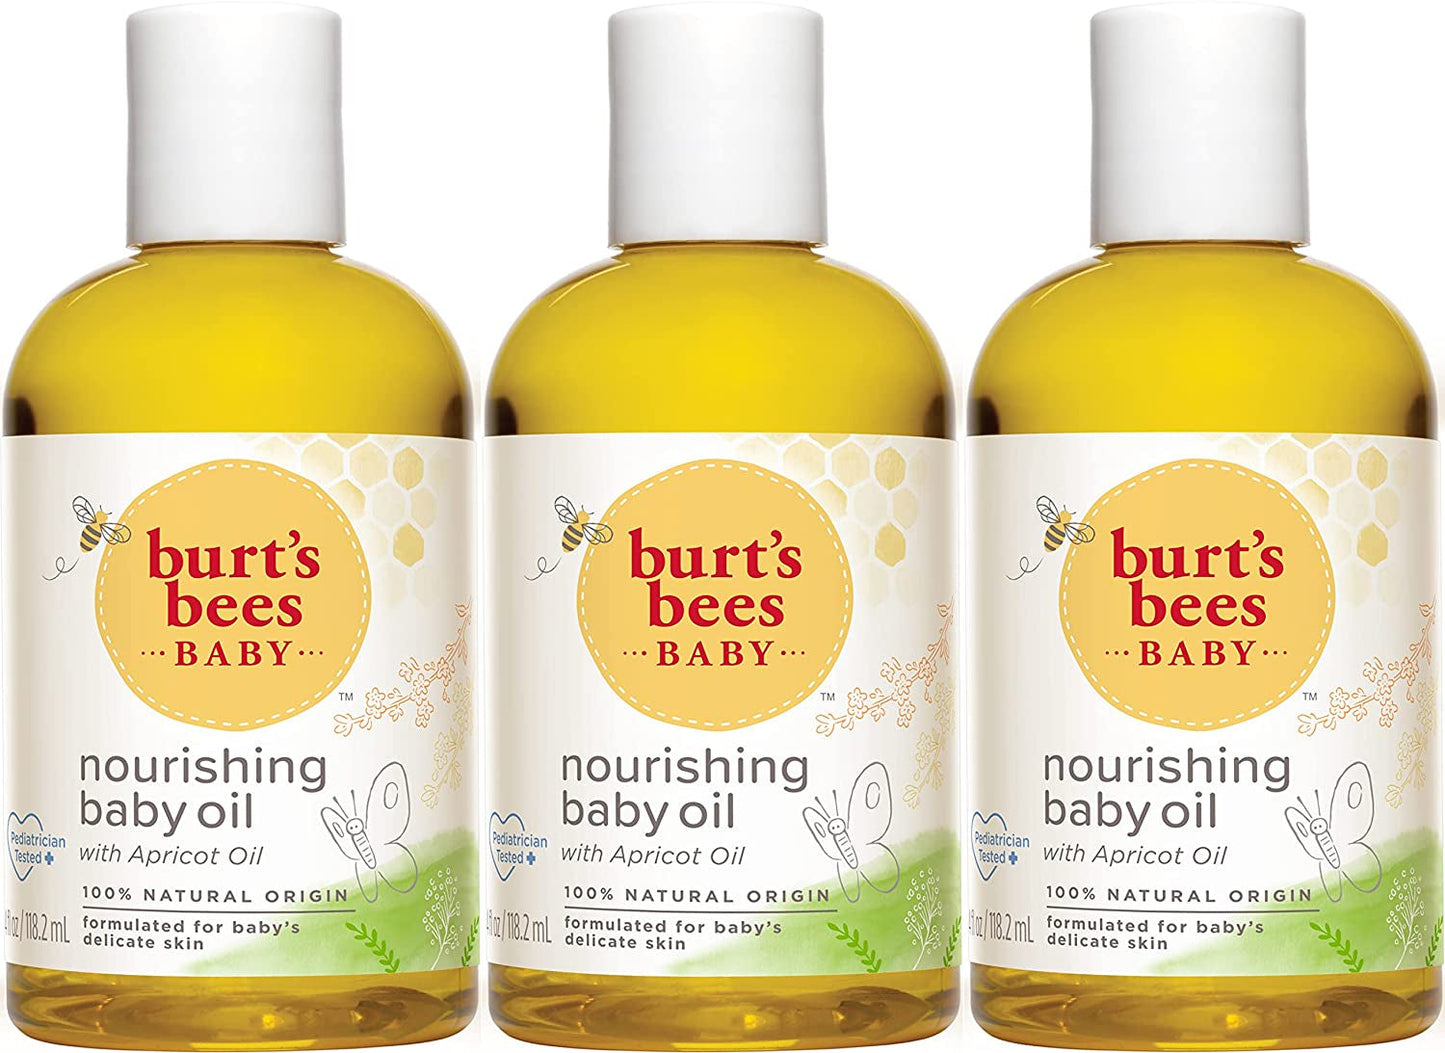 "Baby™ Nourishing Baby Oil - Pure and Gentle Care for Baby'S Skin - 4 Ounce Bottle - Value Pack of 3"